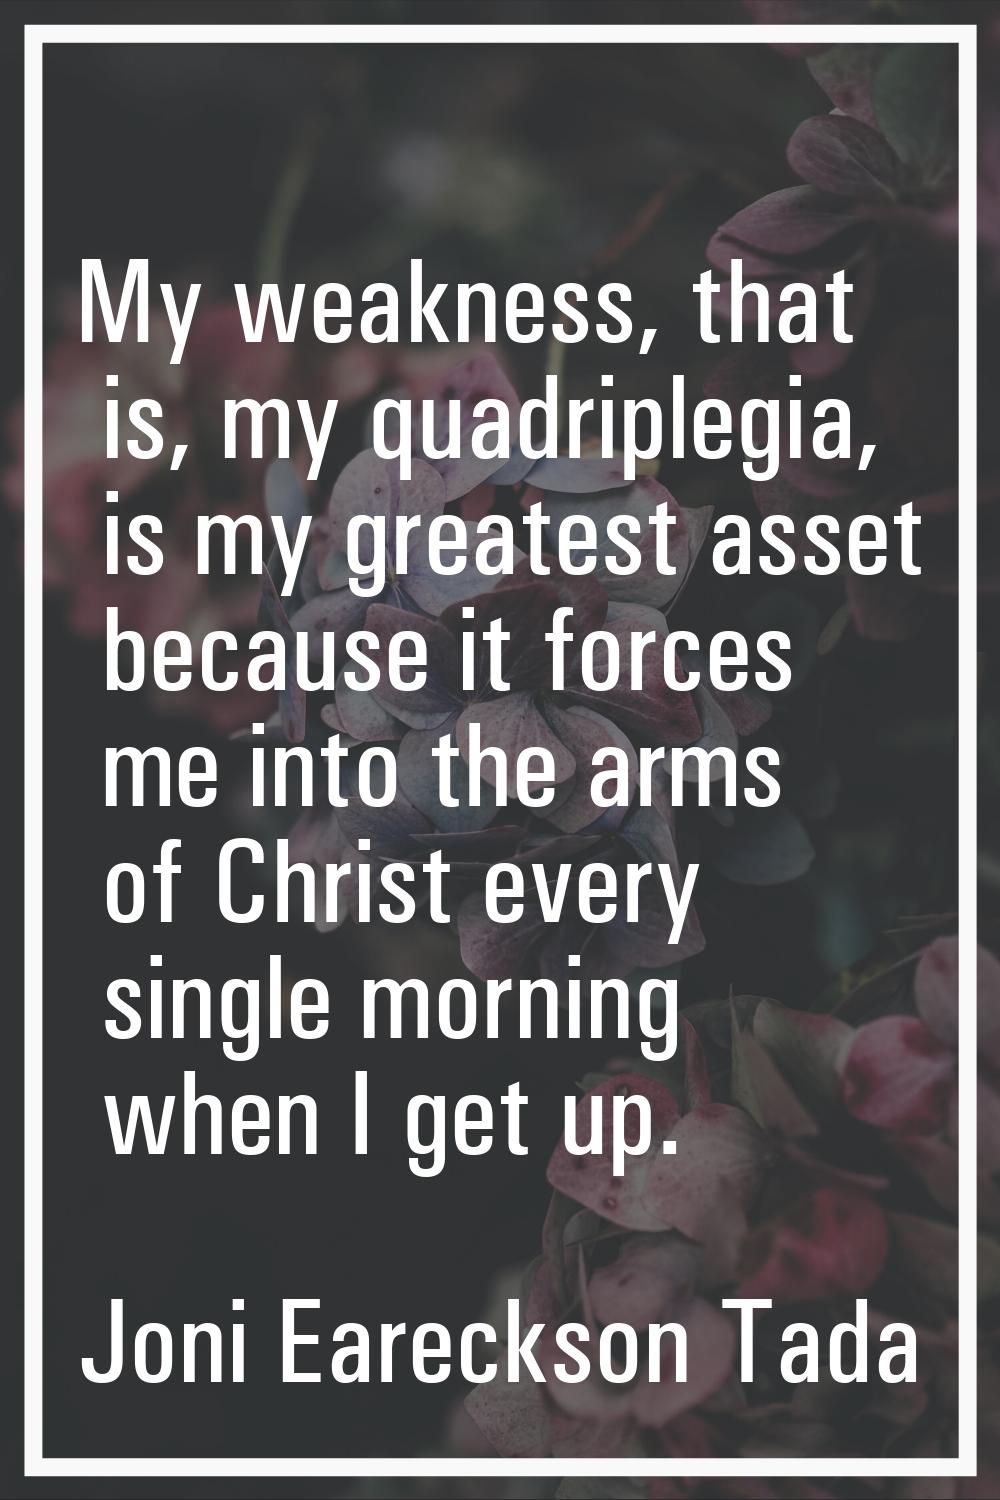 My weakness, that is, my quadriplegia, is my greatest asset because it forces me into the arms of C